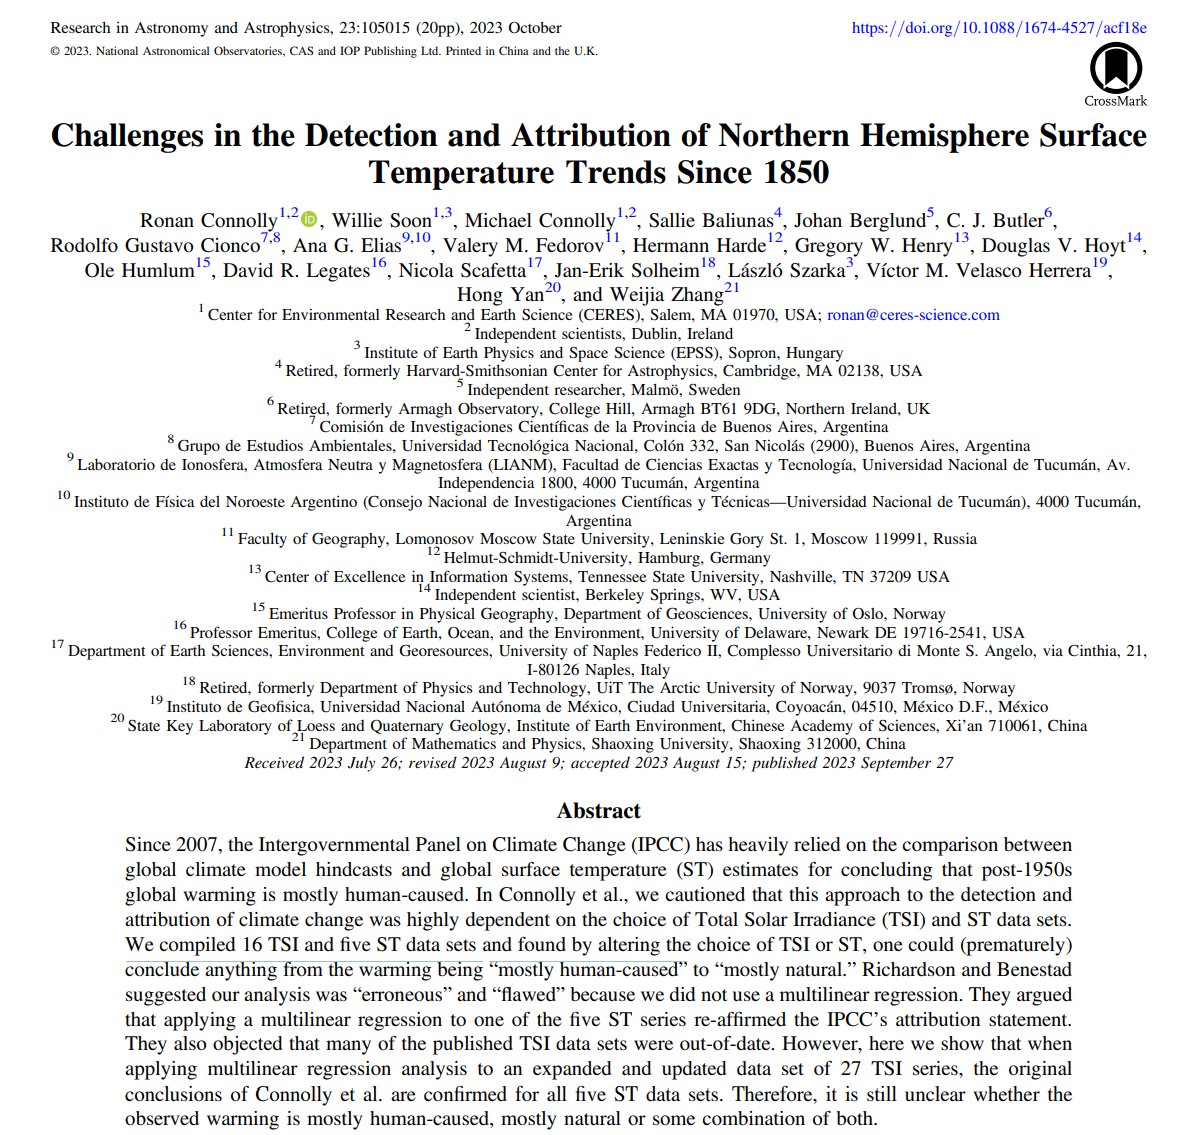 'attribution of climate change was highly dependent on the choice of Total Solar Irradiance (TSI) and ST data sets. We compiled 16 TSI and five ST data sets and found by altering the choice of TSI or ST, one could conclude anything” iopscience.iop.org/article/10.108… #ClimateScam